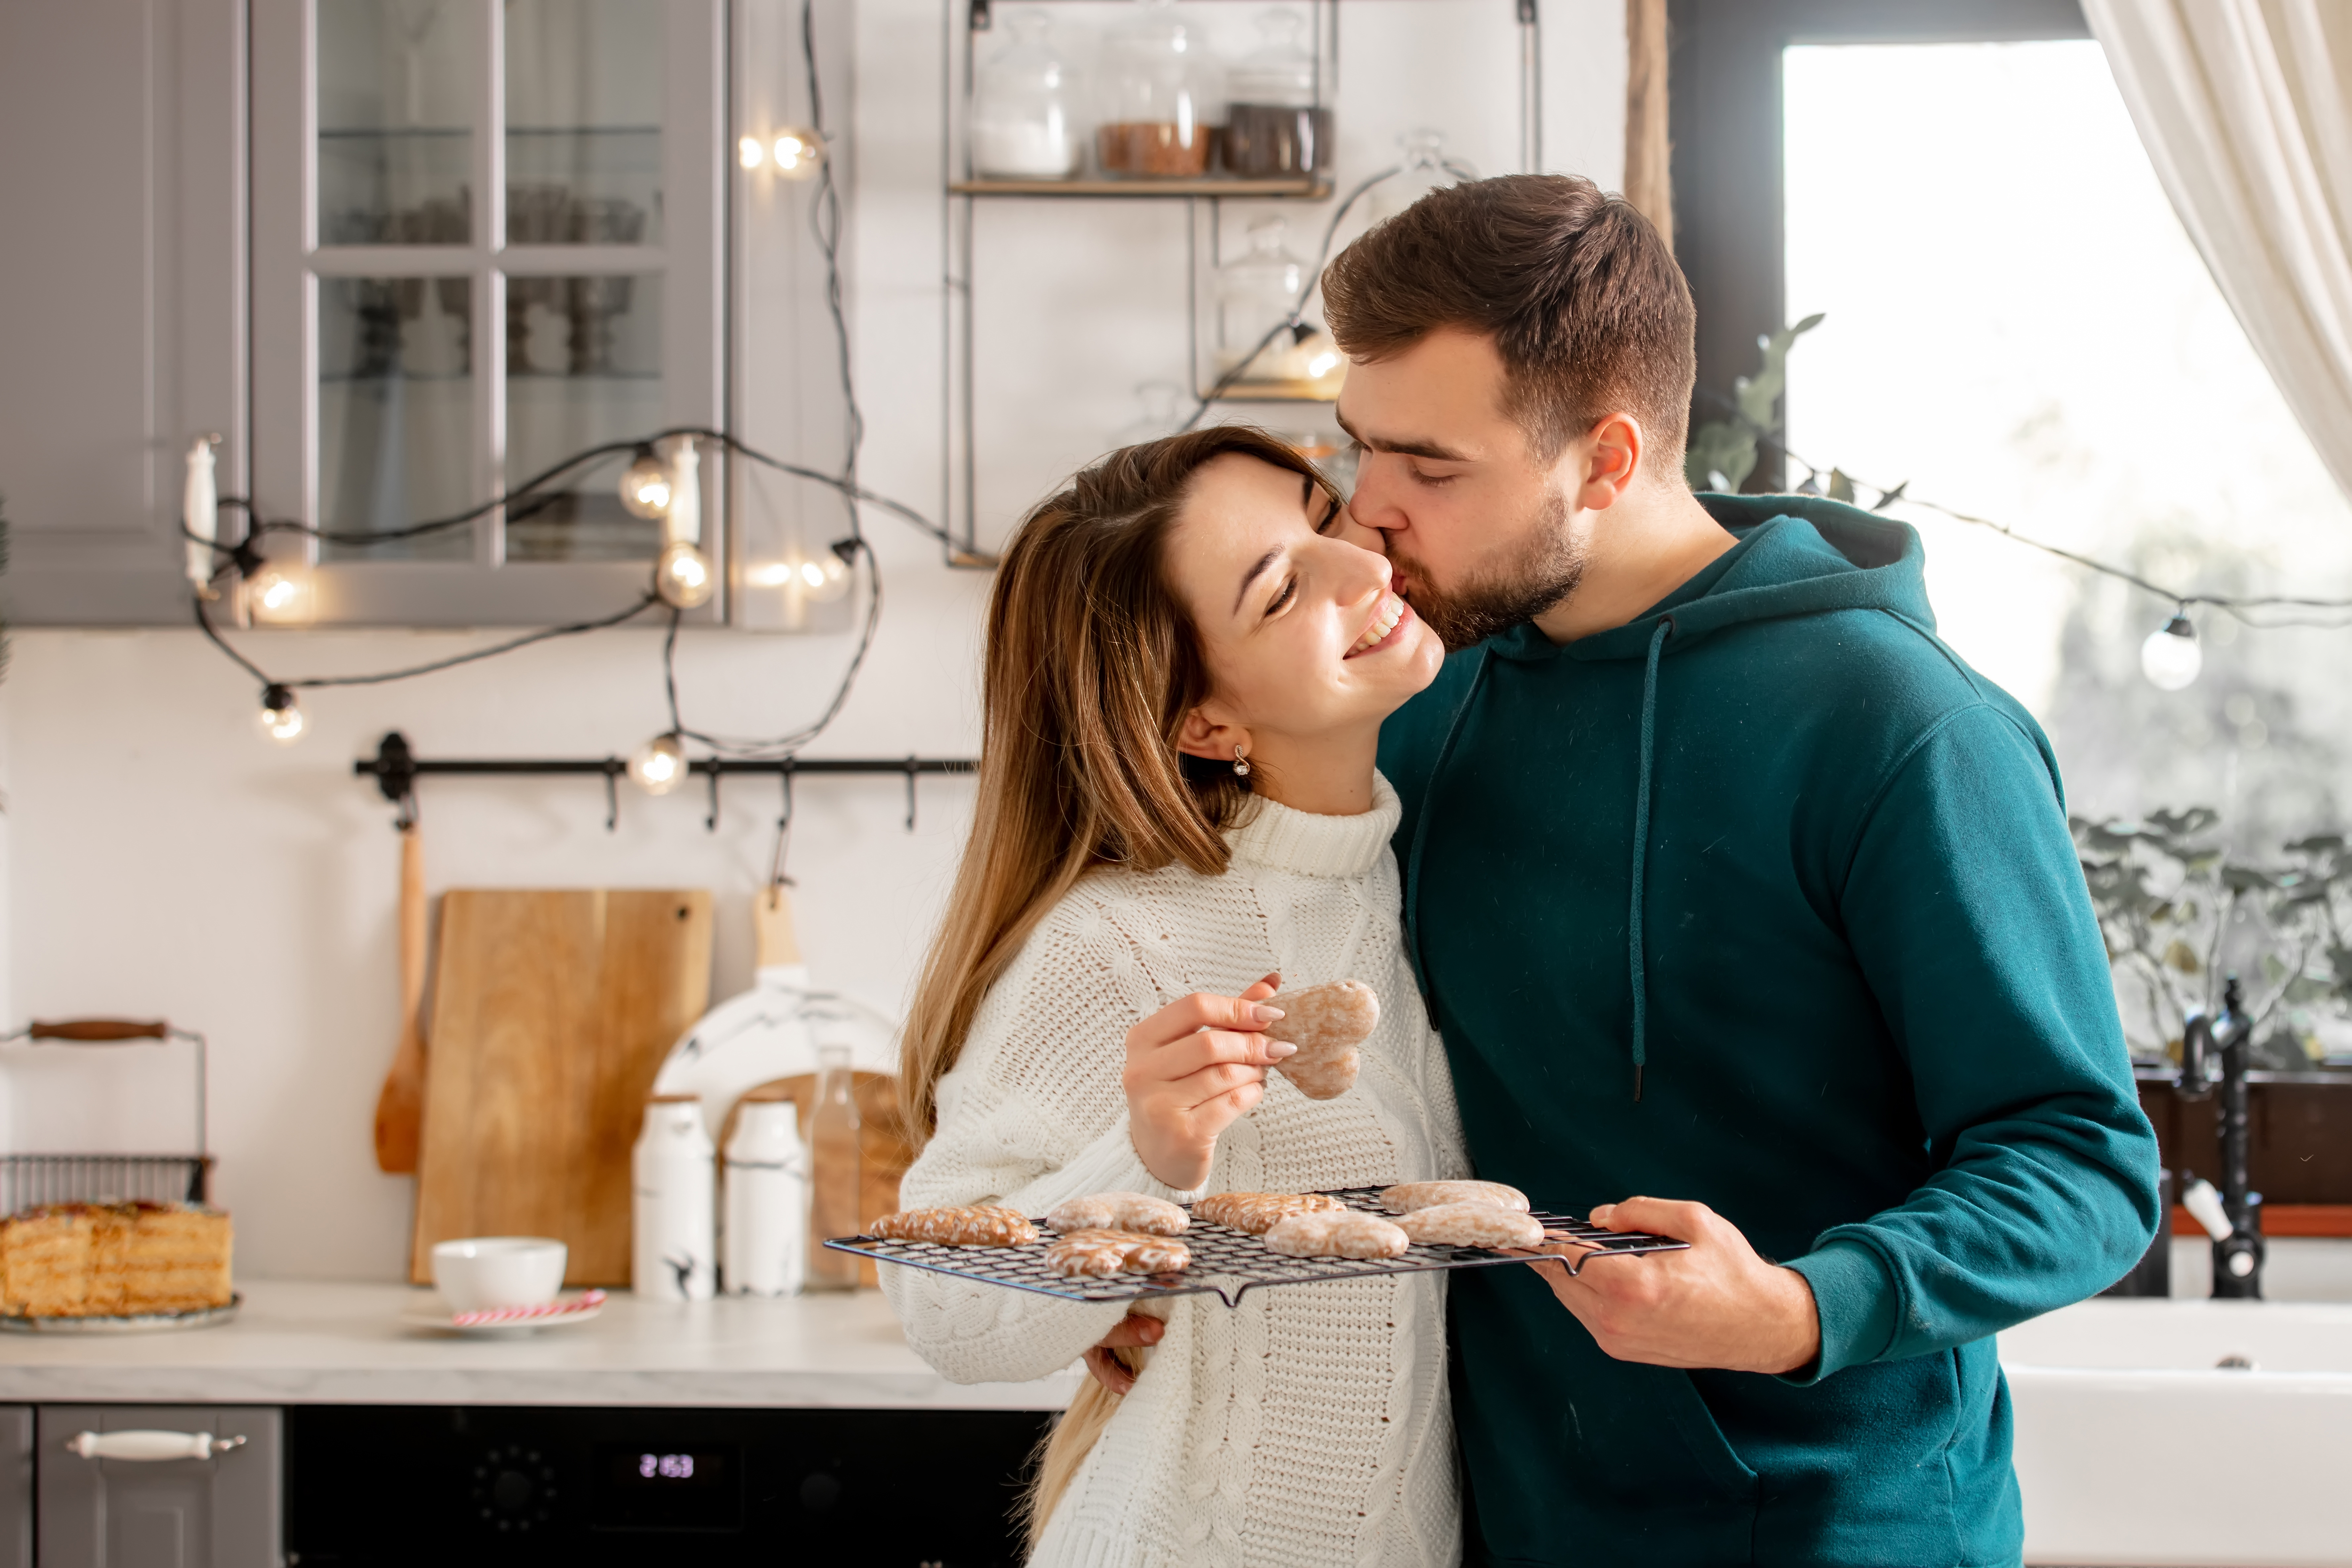 A young couple baking cookies in the kitchen | Source: Shutterstock